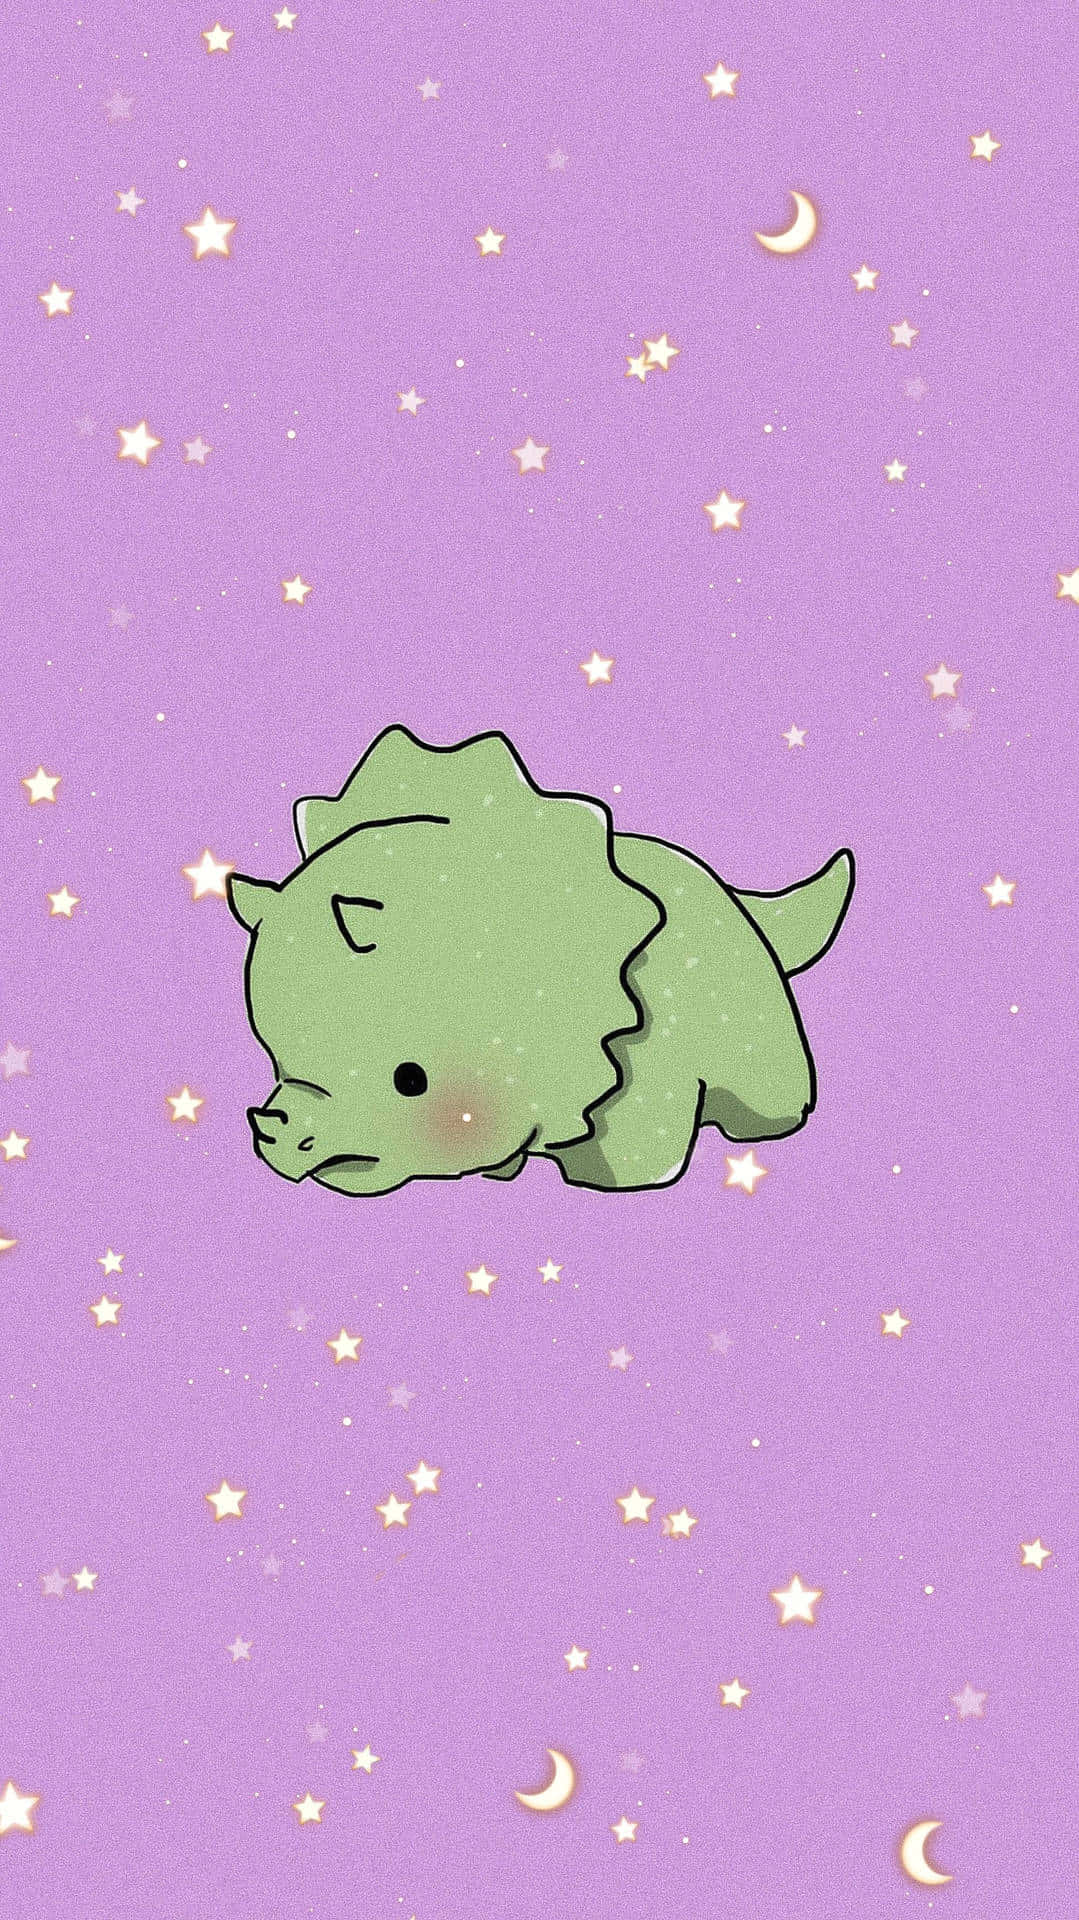 A Cute Little Dinosaur Laying On A Purple Background Wallpaper